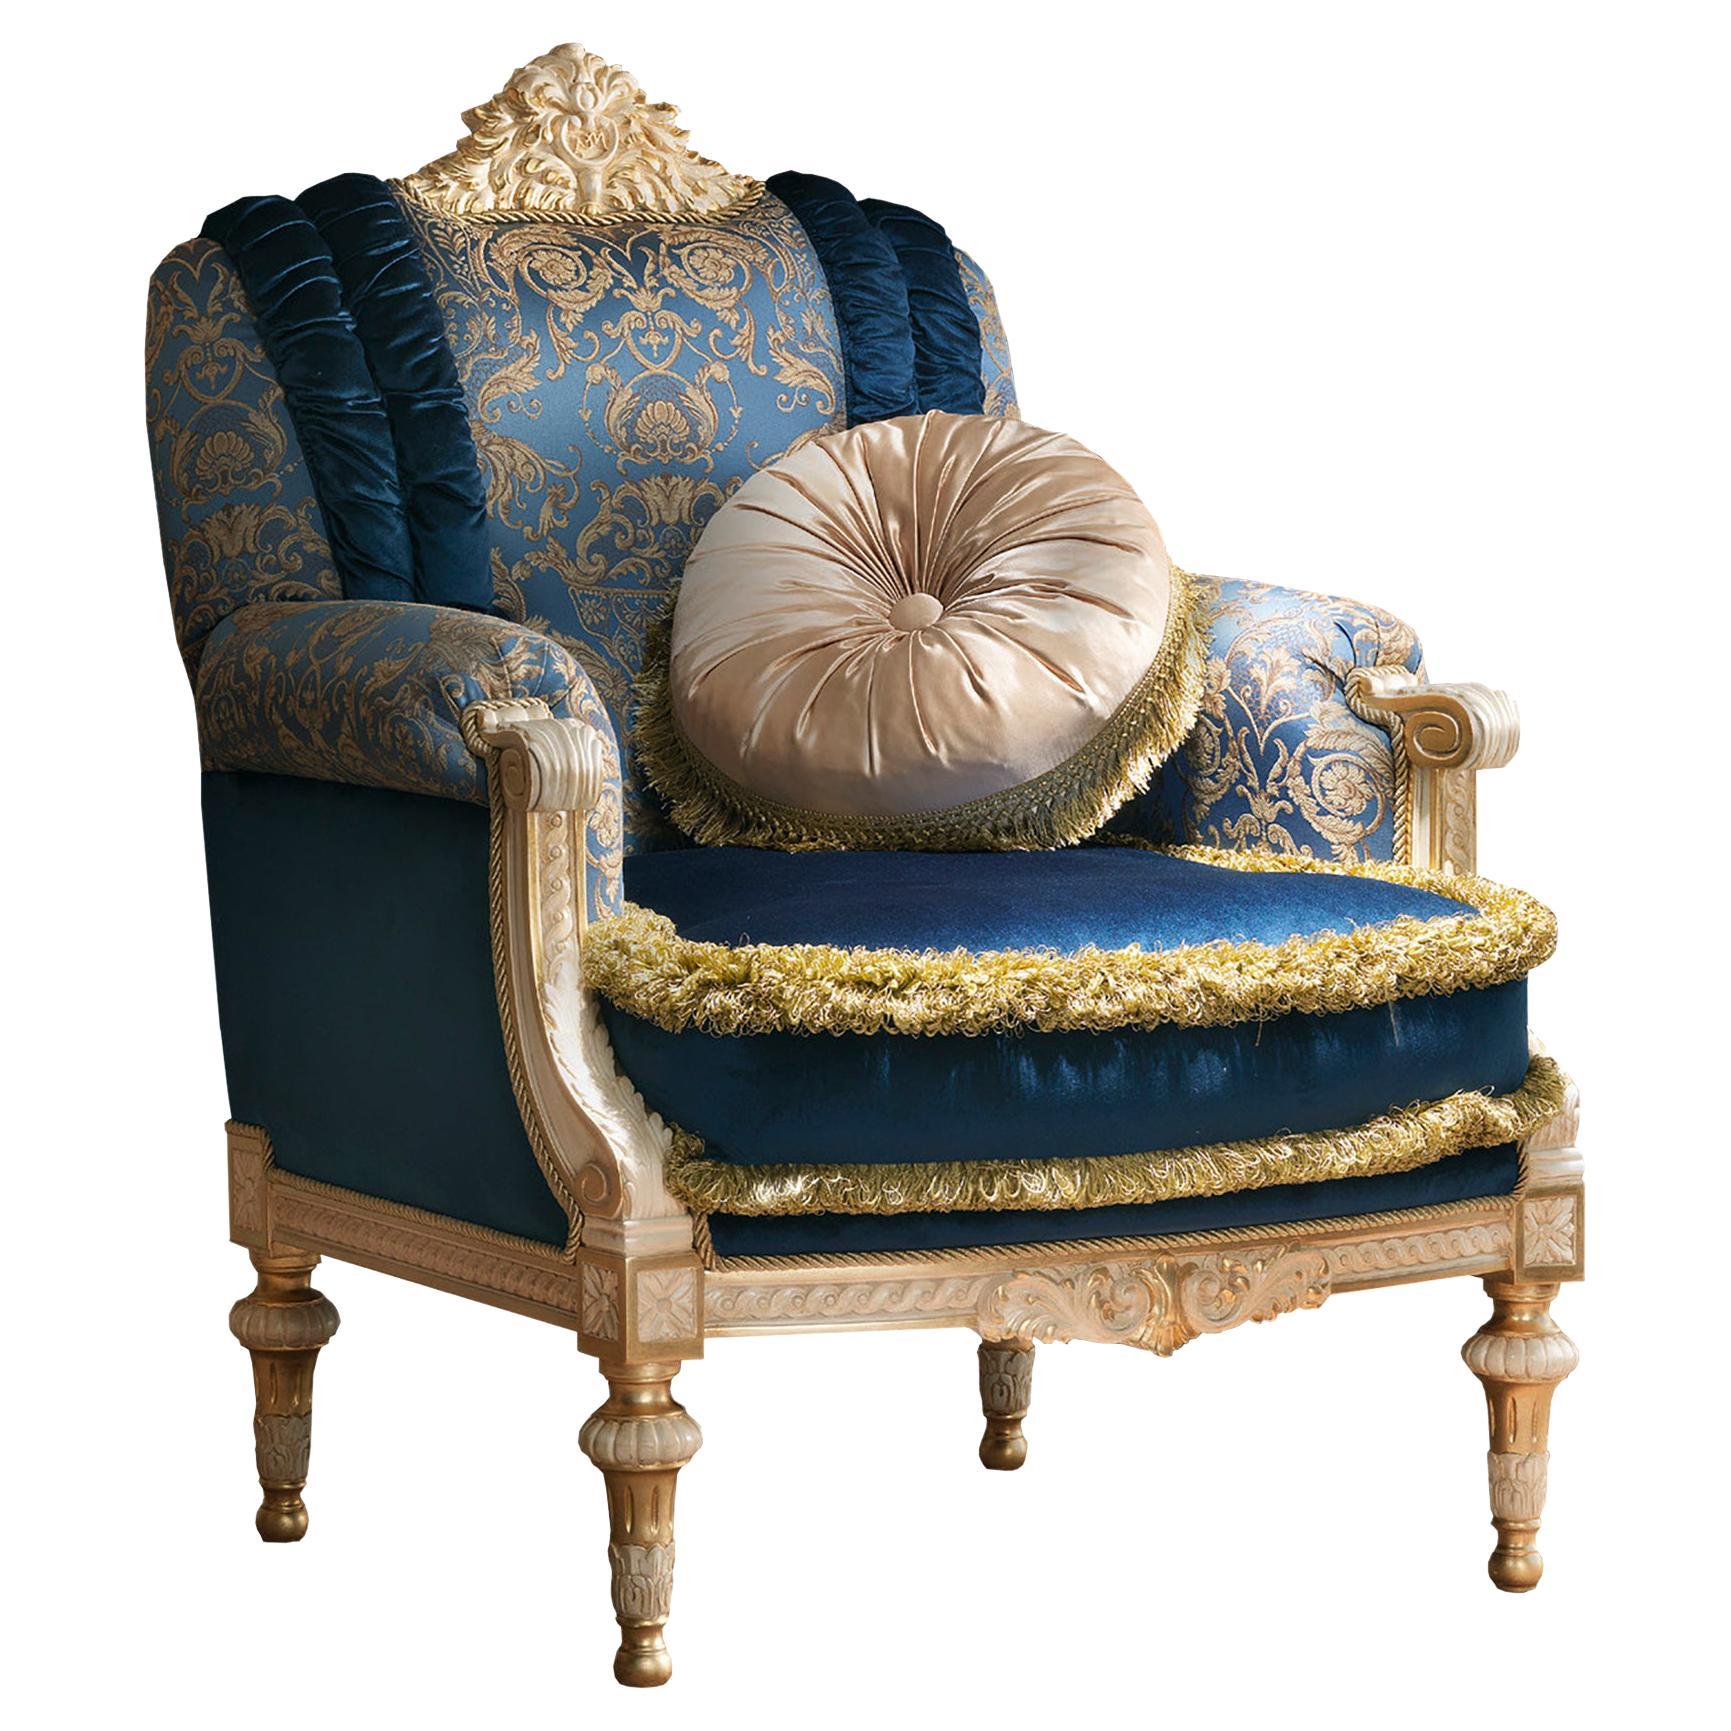 Noble Venetian Armchair in Blue and Gold Fabrics with Pillow For Sale